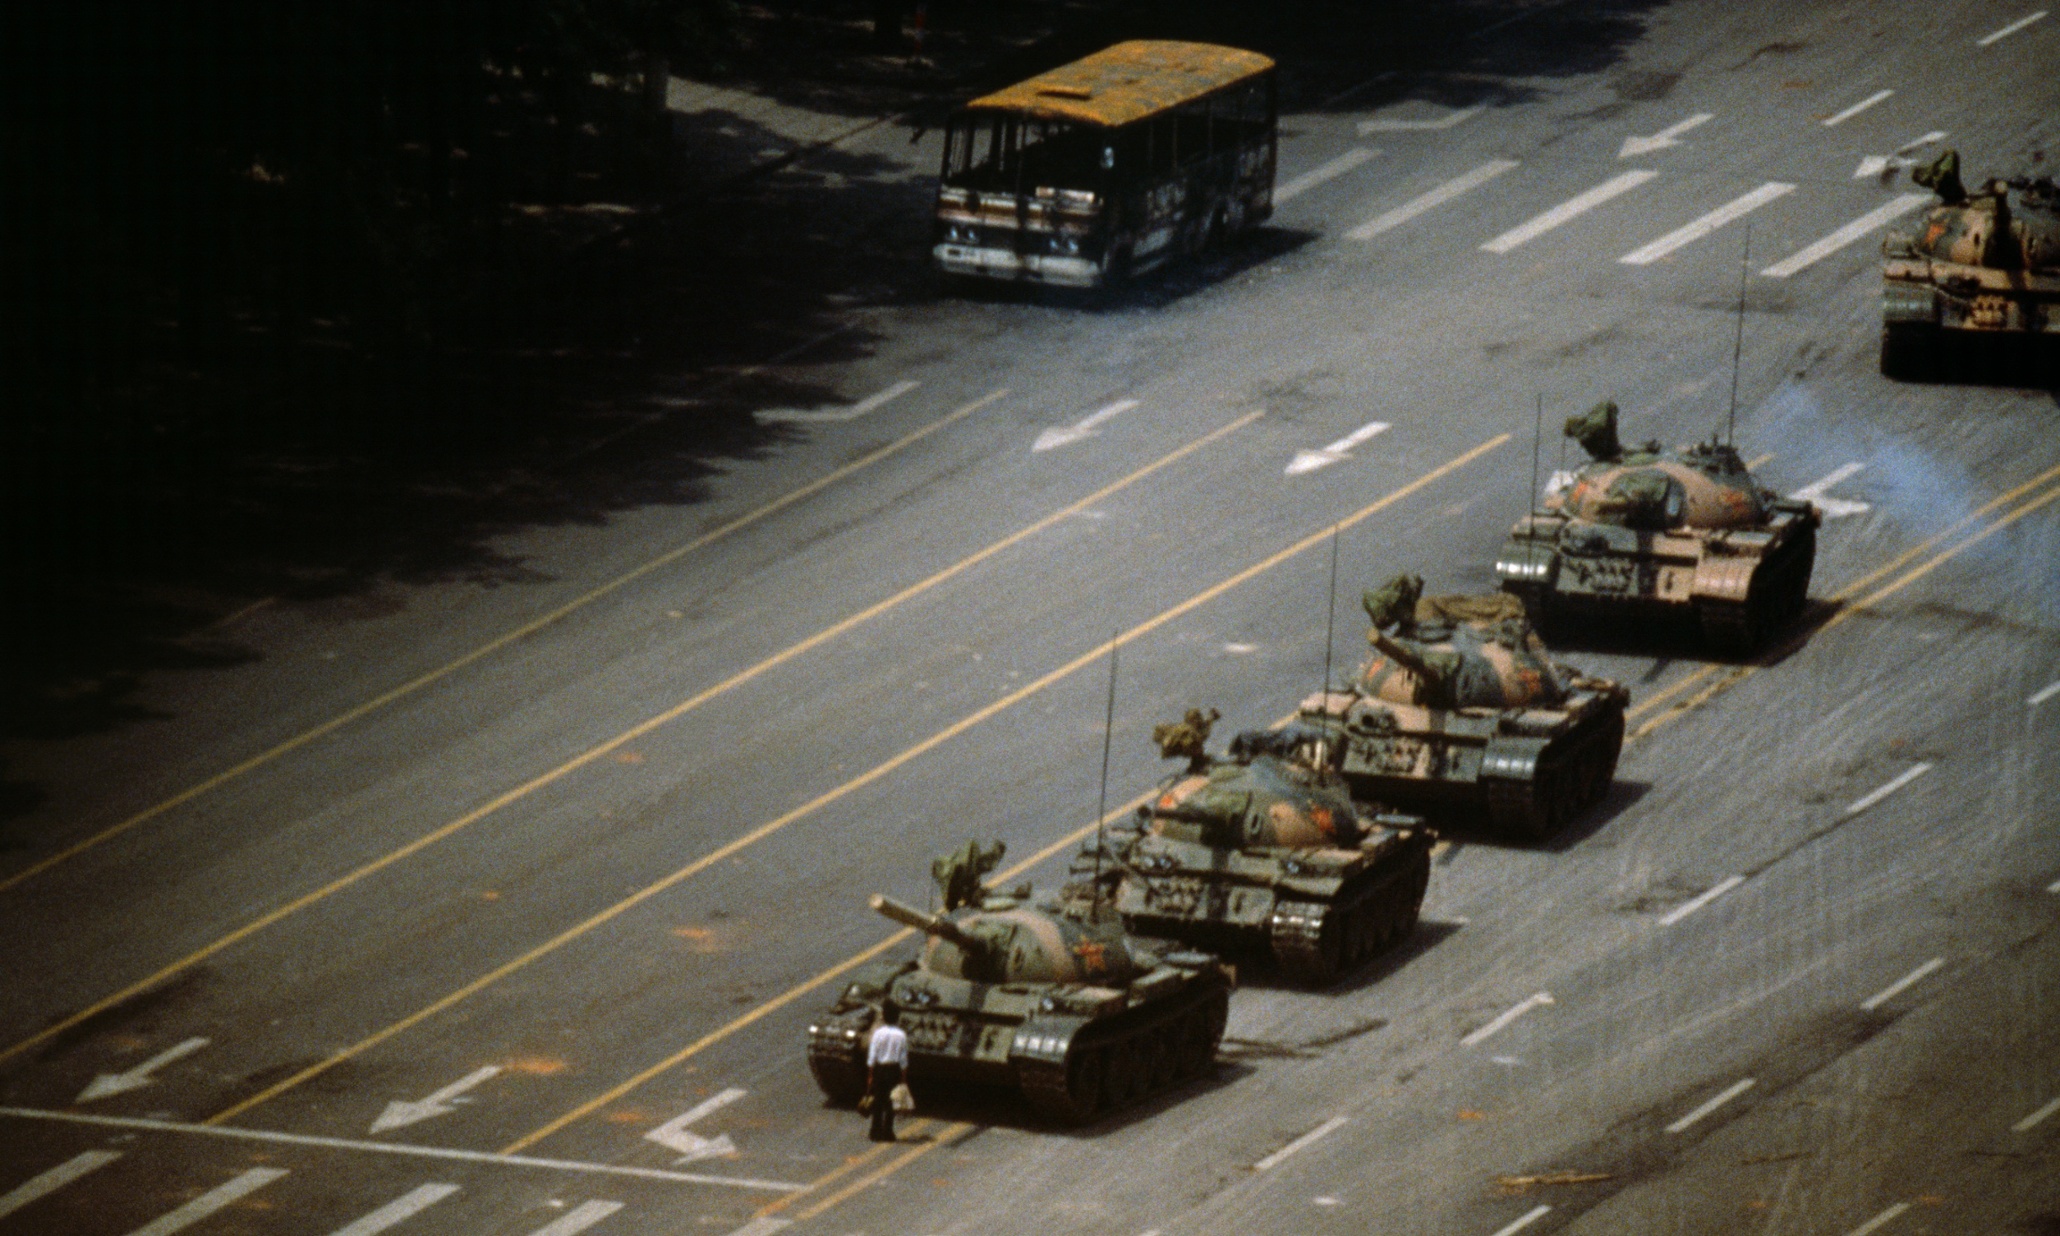 THE EVIL RED EMPIRE - RED CHINA - COMMUNIST :  Beijing. Tien An Men Square. 'The Tank Man' stopping the column of T59 tanks. 4th June 1989.